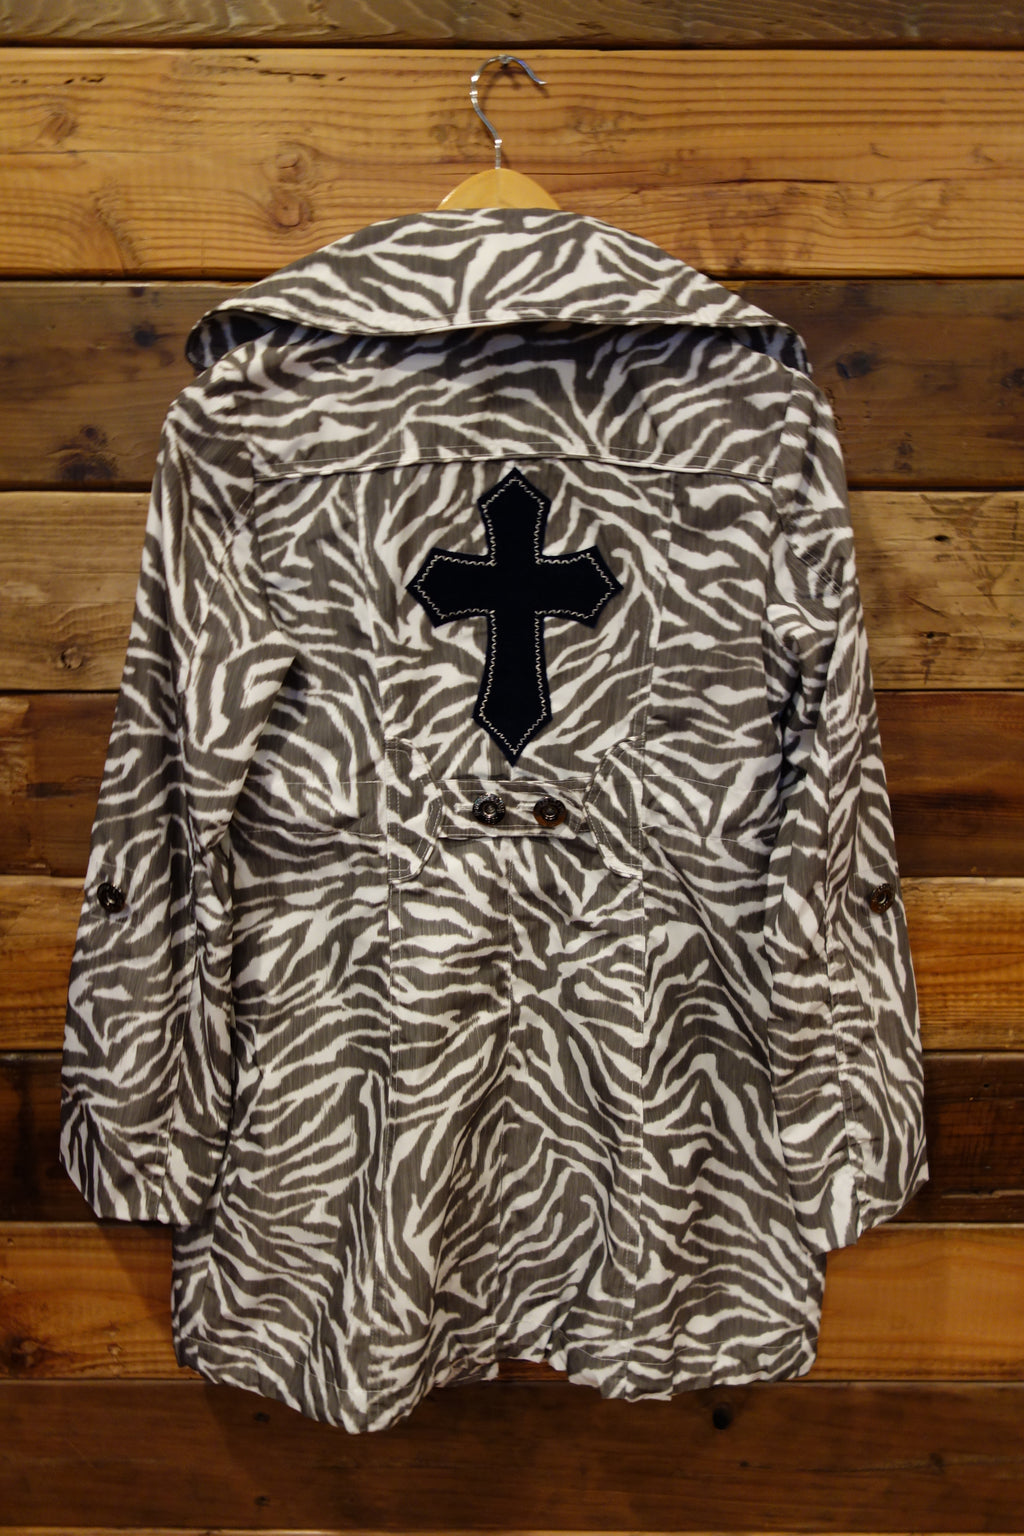 Guess vintage zebra rain jacket, one of a kind, cross, upcycled clothing